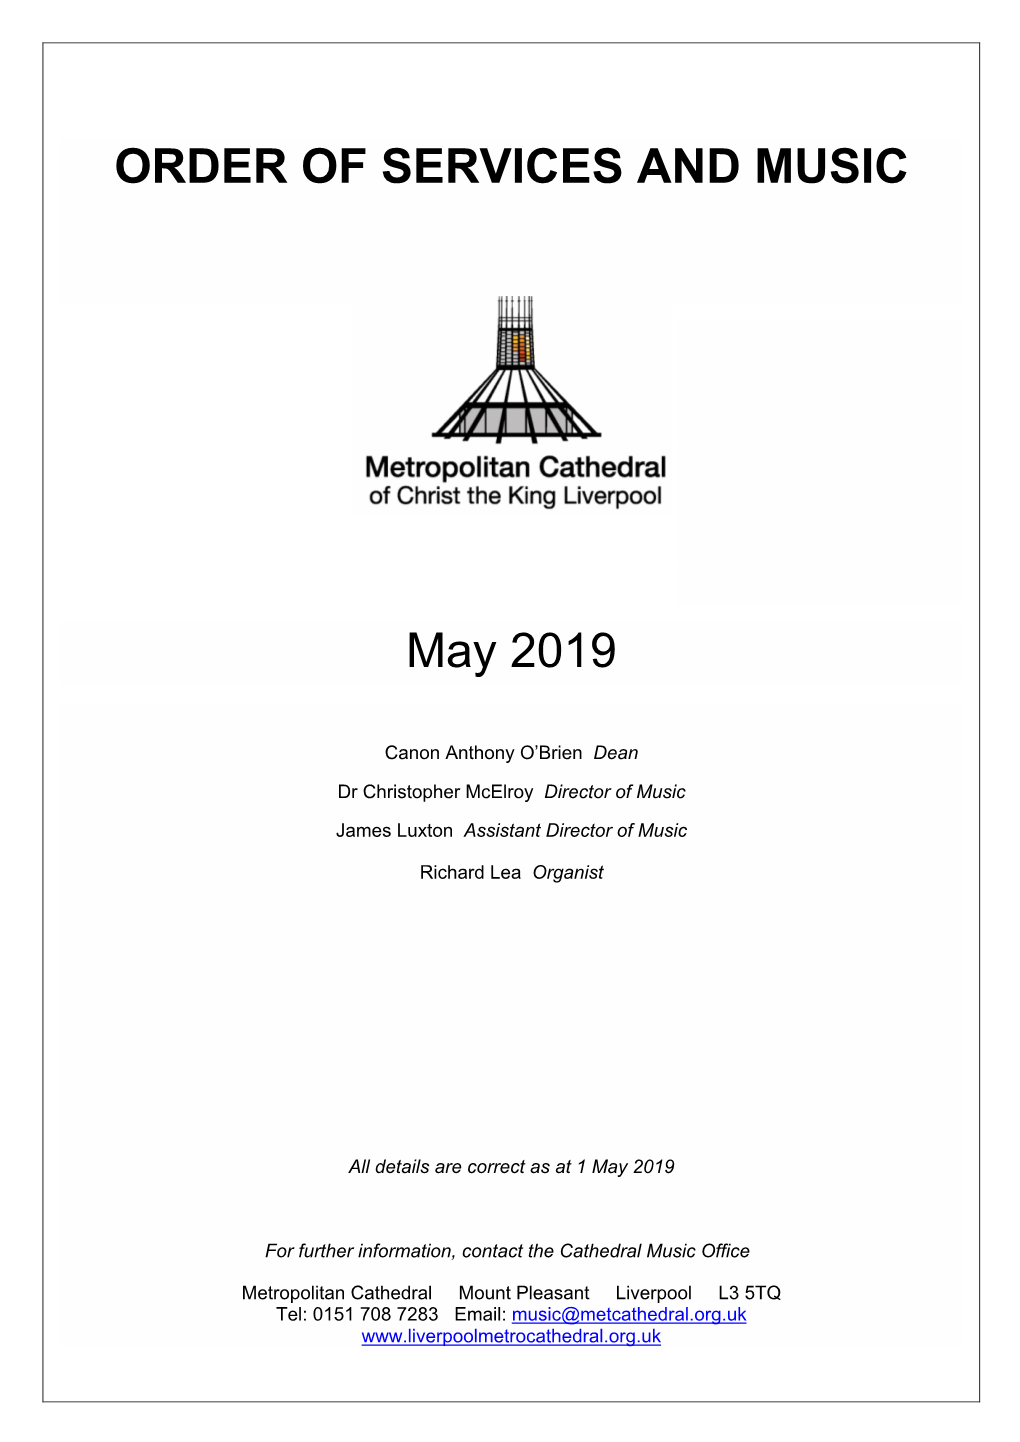 ORDER of SERVICES and MUSIC May 2019